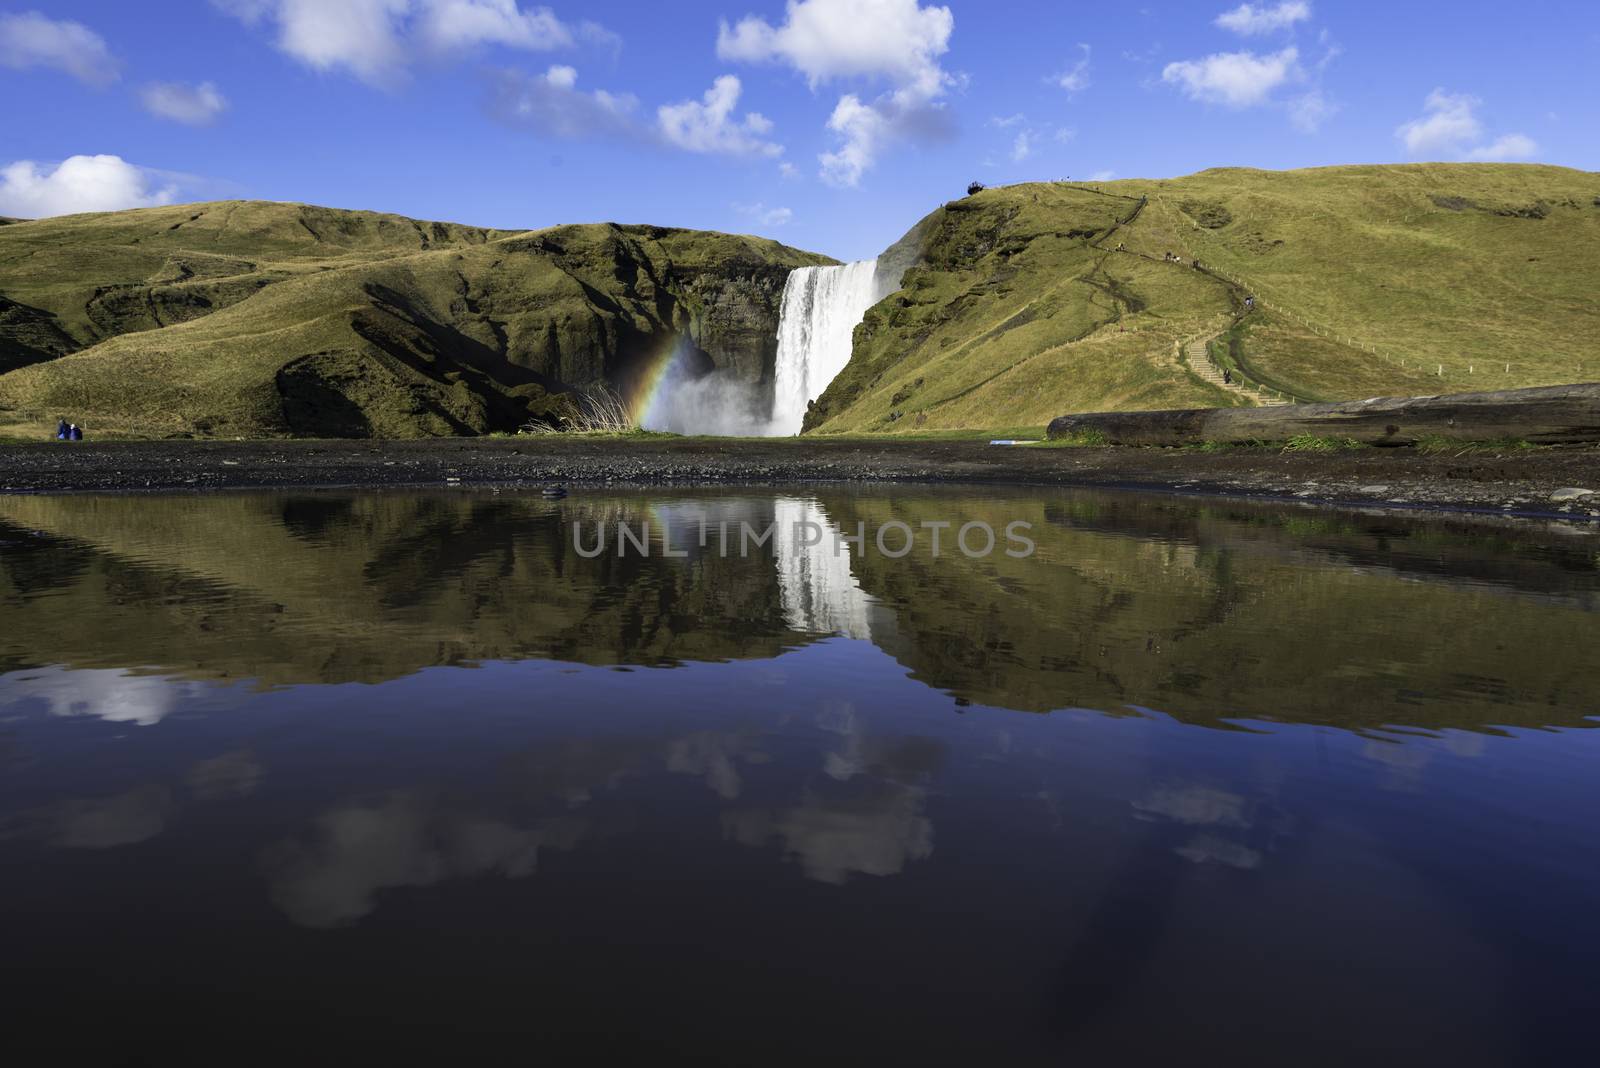 Skogafoss is a waterfall situated on the Skoga River in the south of Iceland at the cliffs of the former coastline